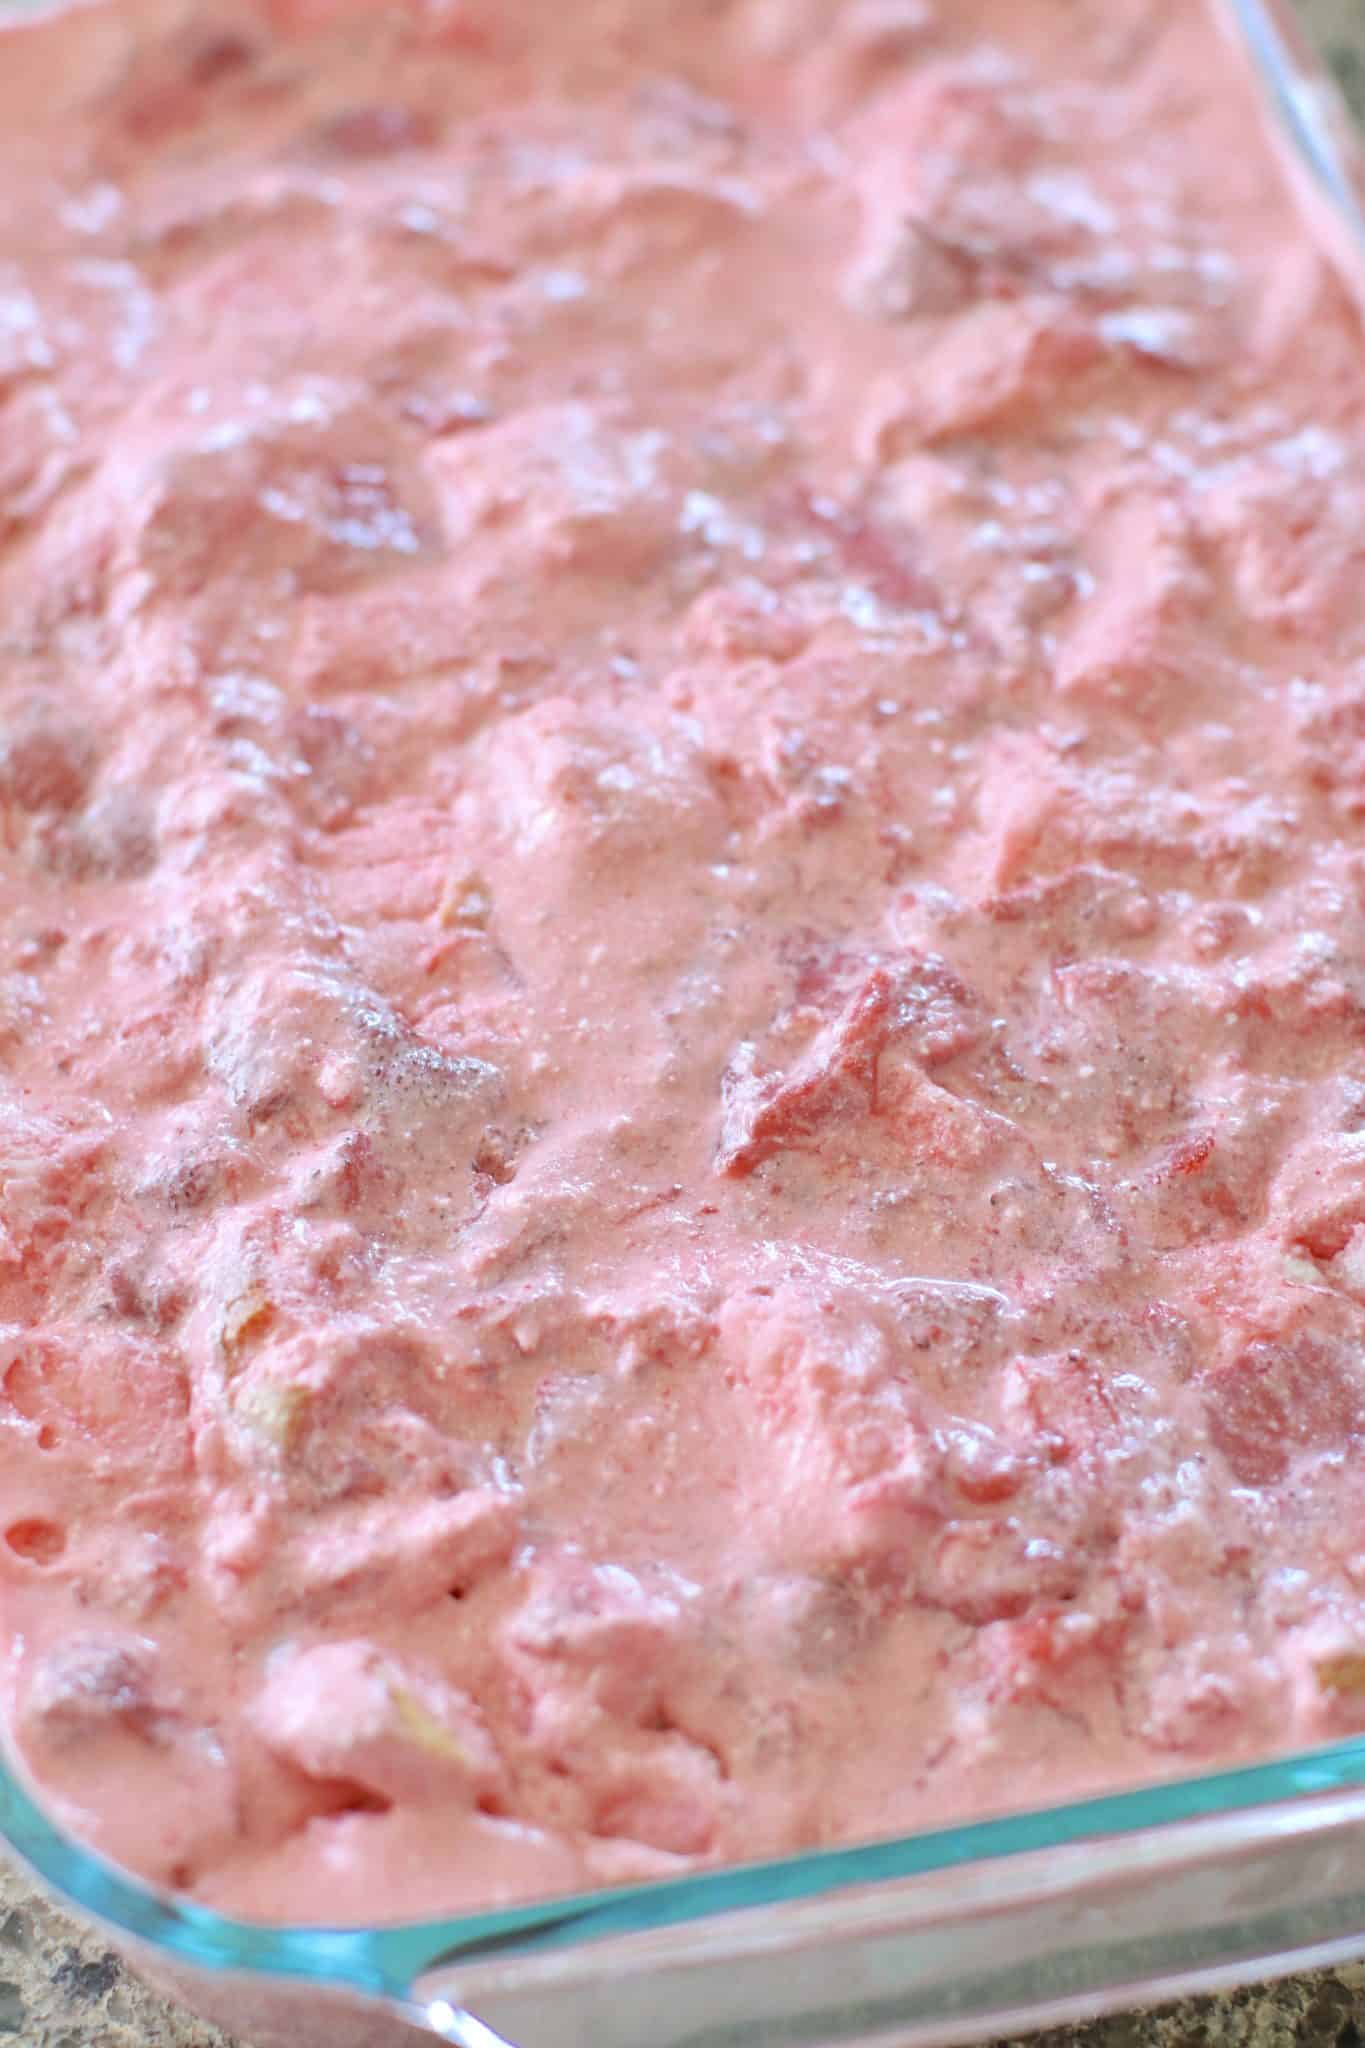 final layer of strawberry gelatin mix spread out on. top of diced angle food cake.